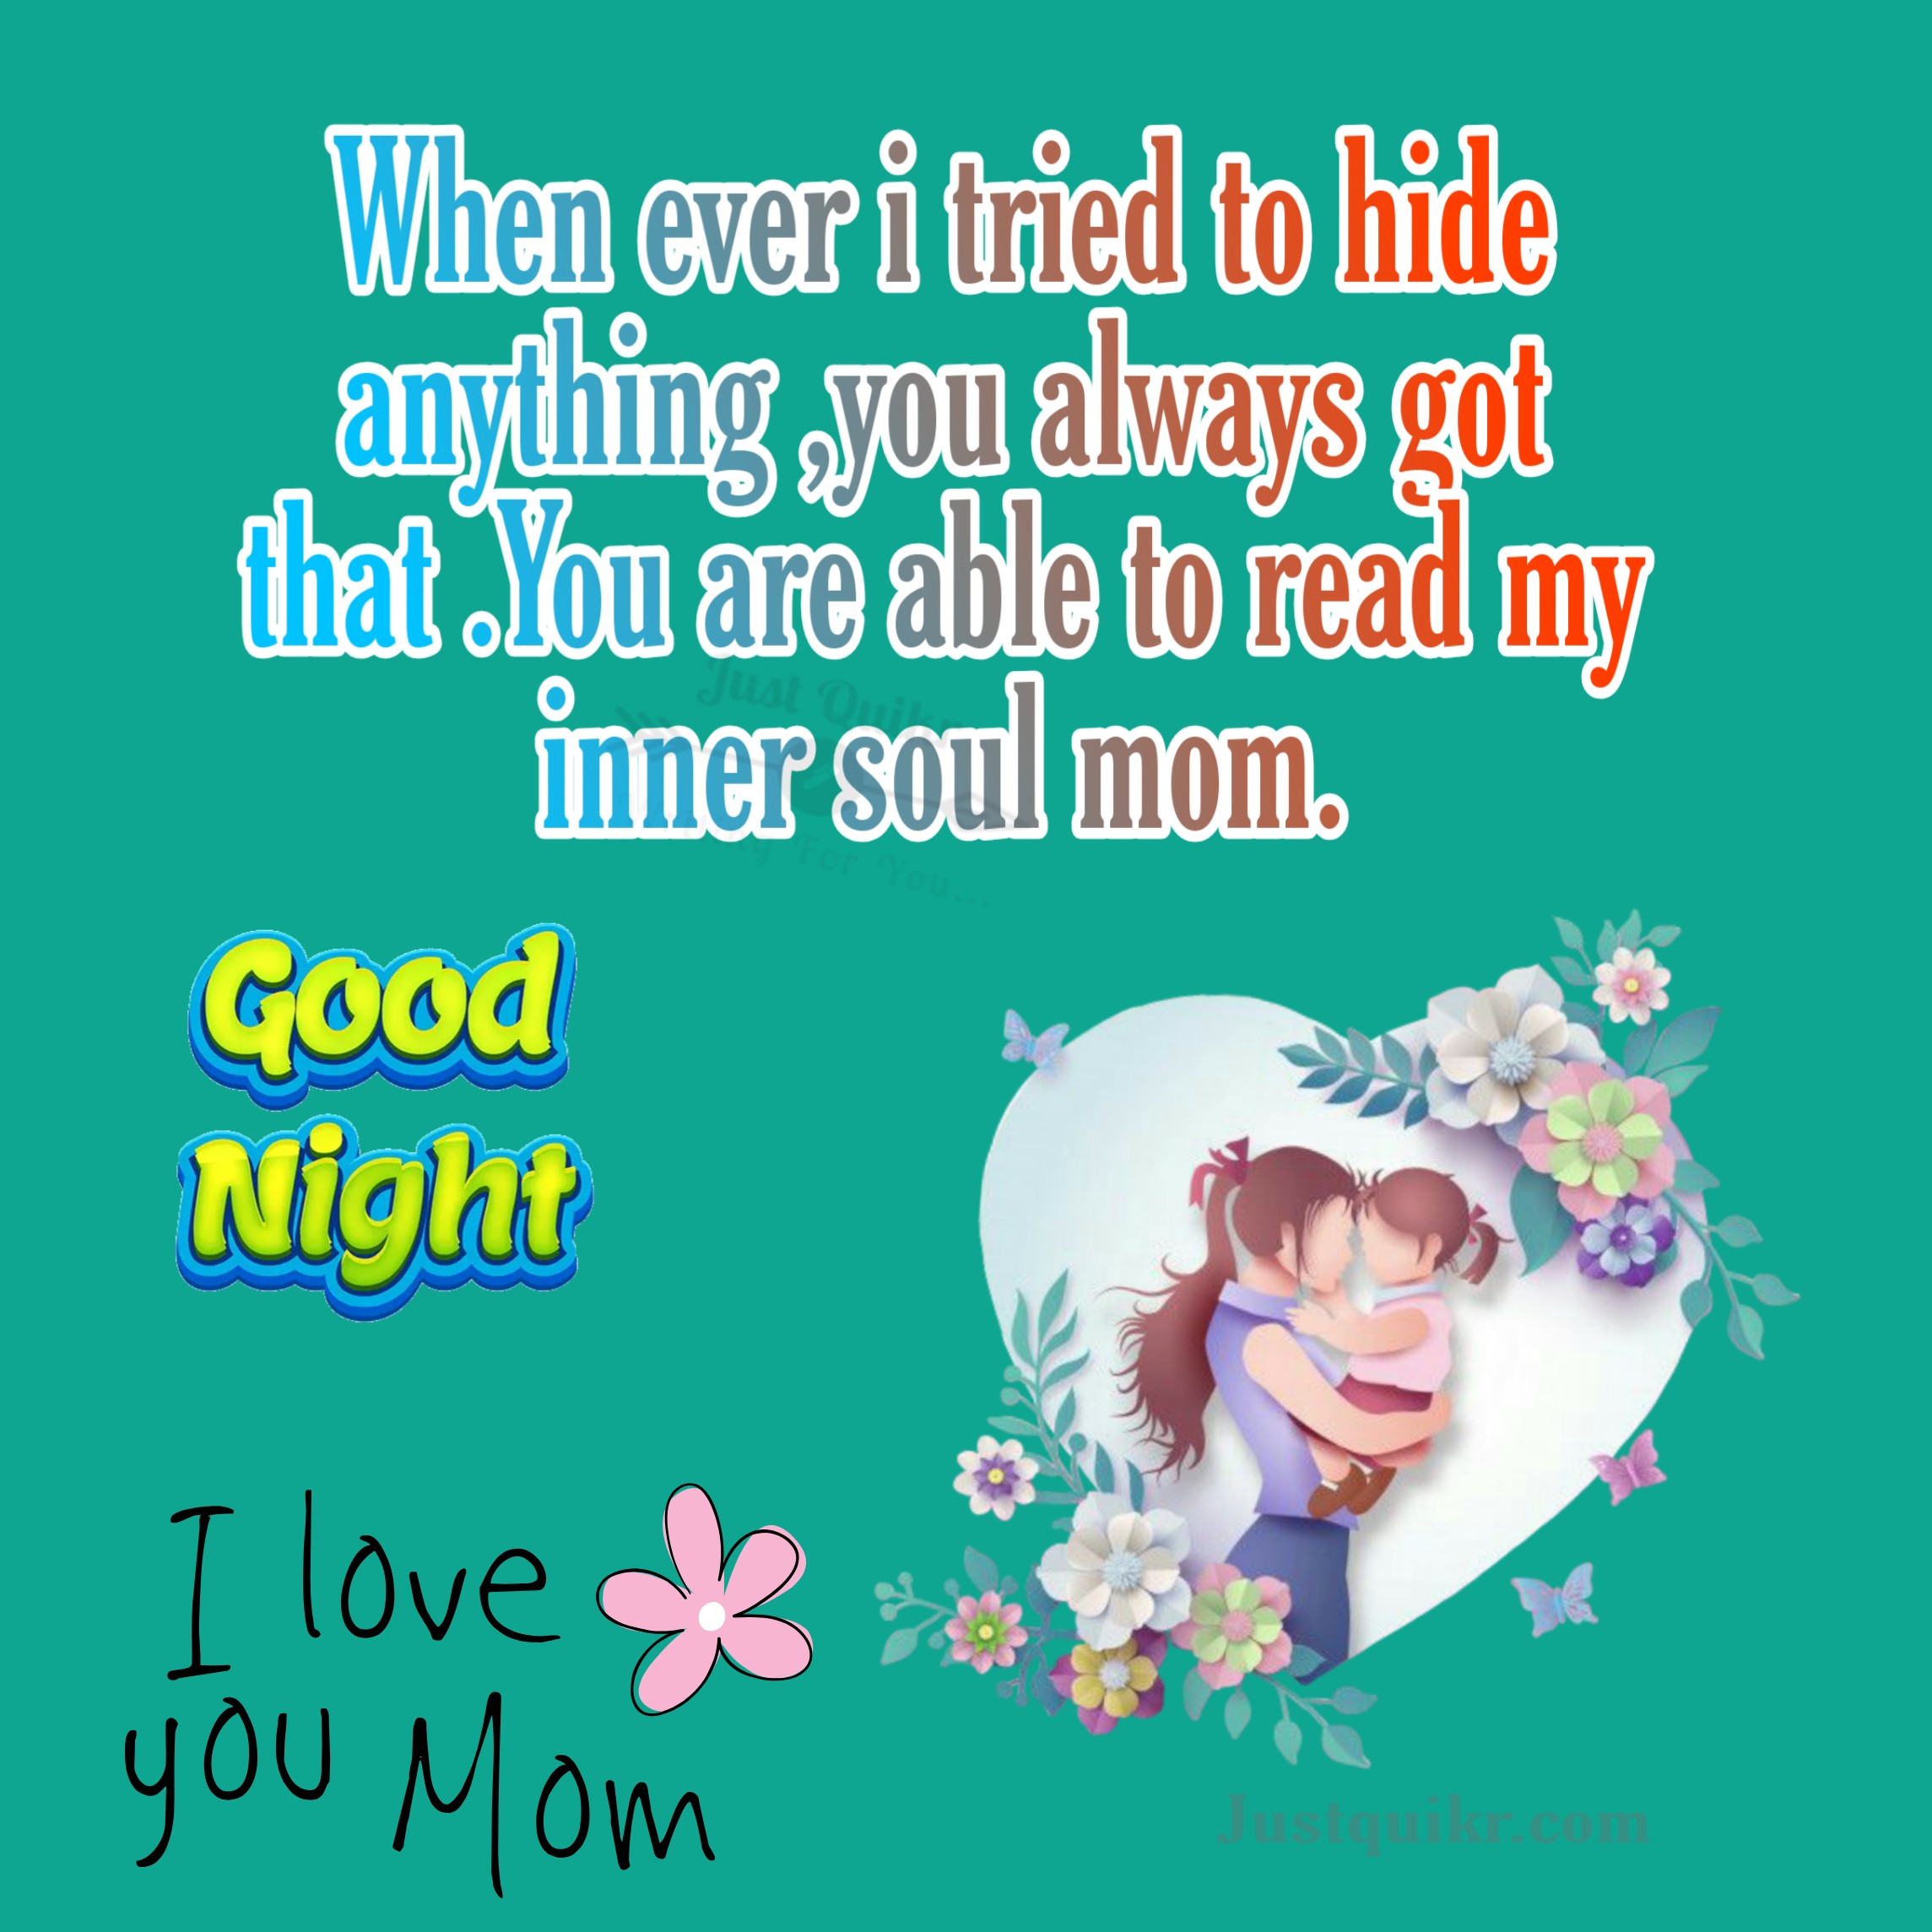 Good Night HD Pics Images For My Mom 